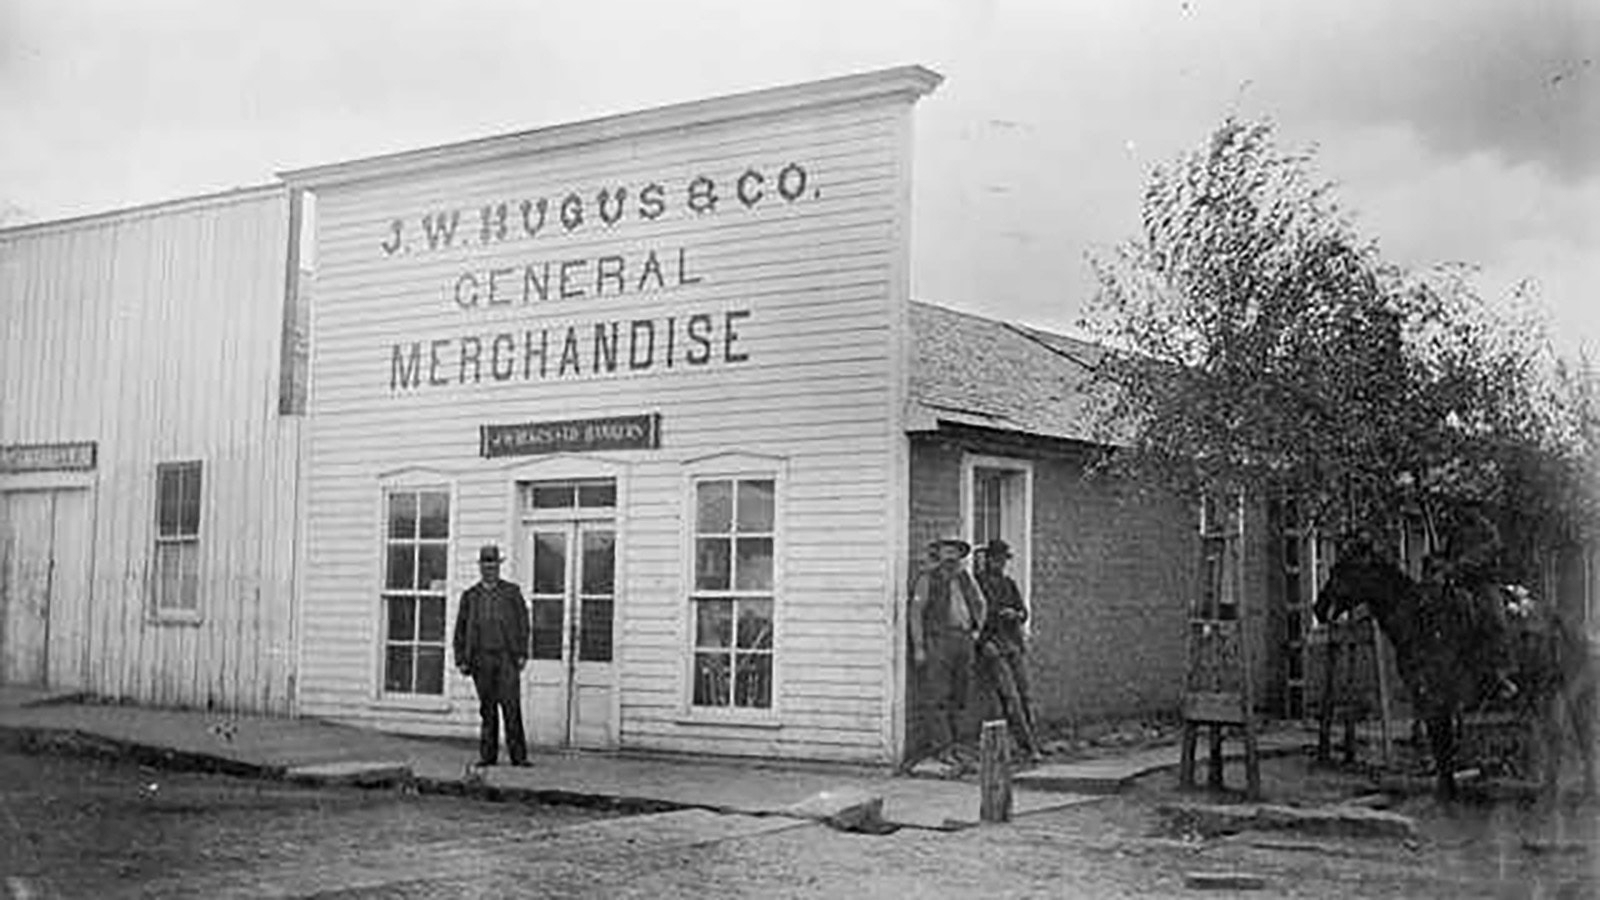 Local residents and ranchers were served by the J.W. Hugus mercantile store more than a century ago.